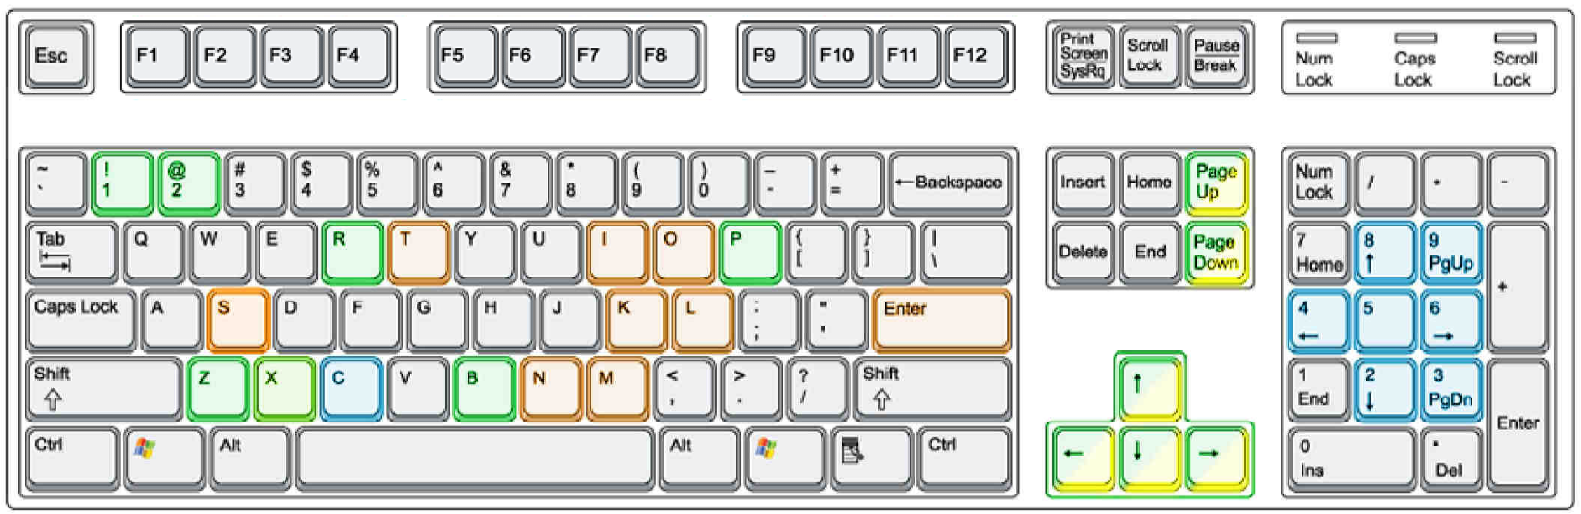 Planes and boats keyboard layout